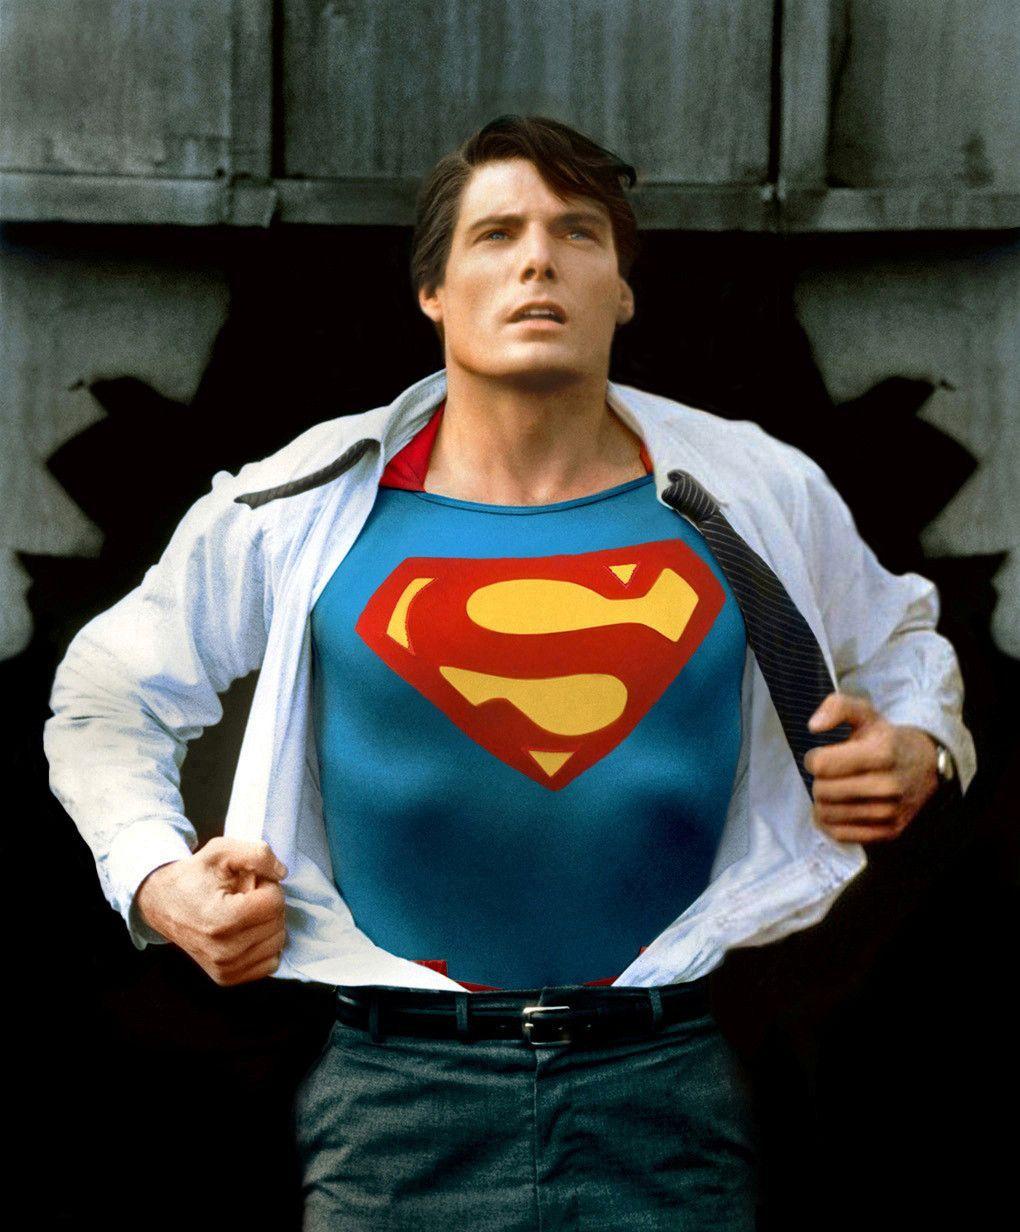 Christopher Reeve A classic photo recently restored